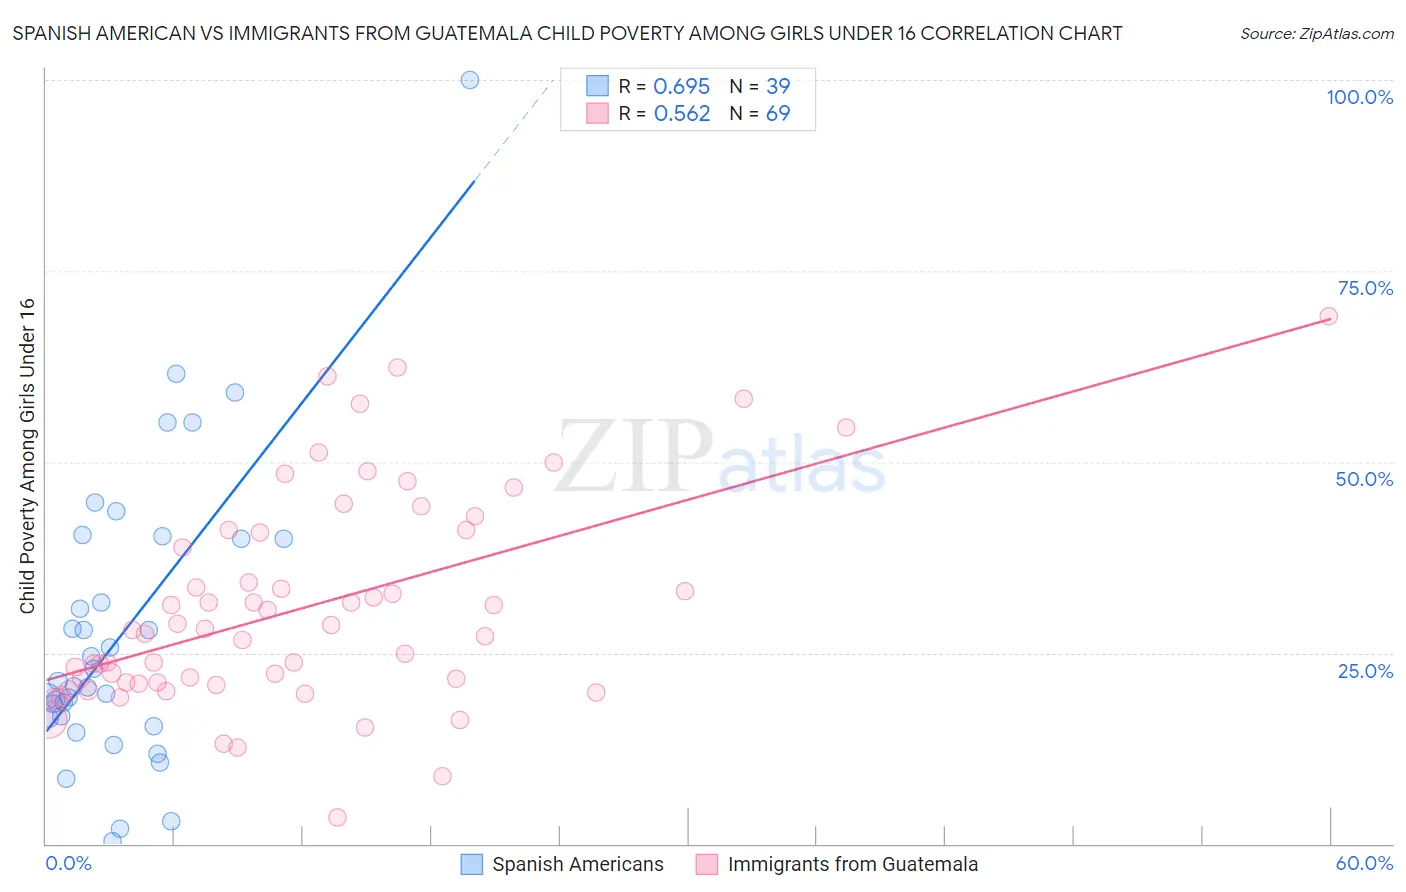 Spanish American vs Immigrants from Guatemala Child Poverty Among Girls Under 16